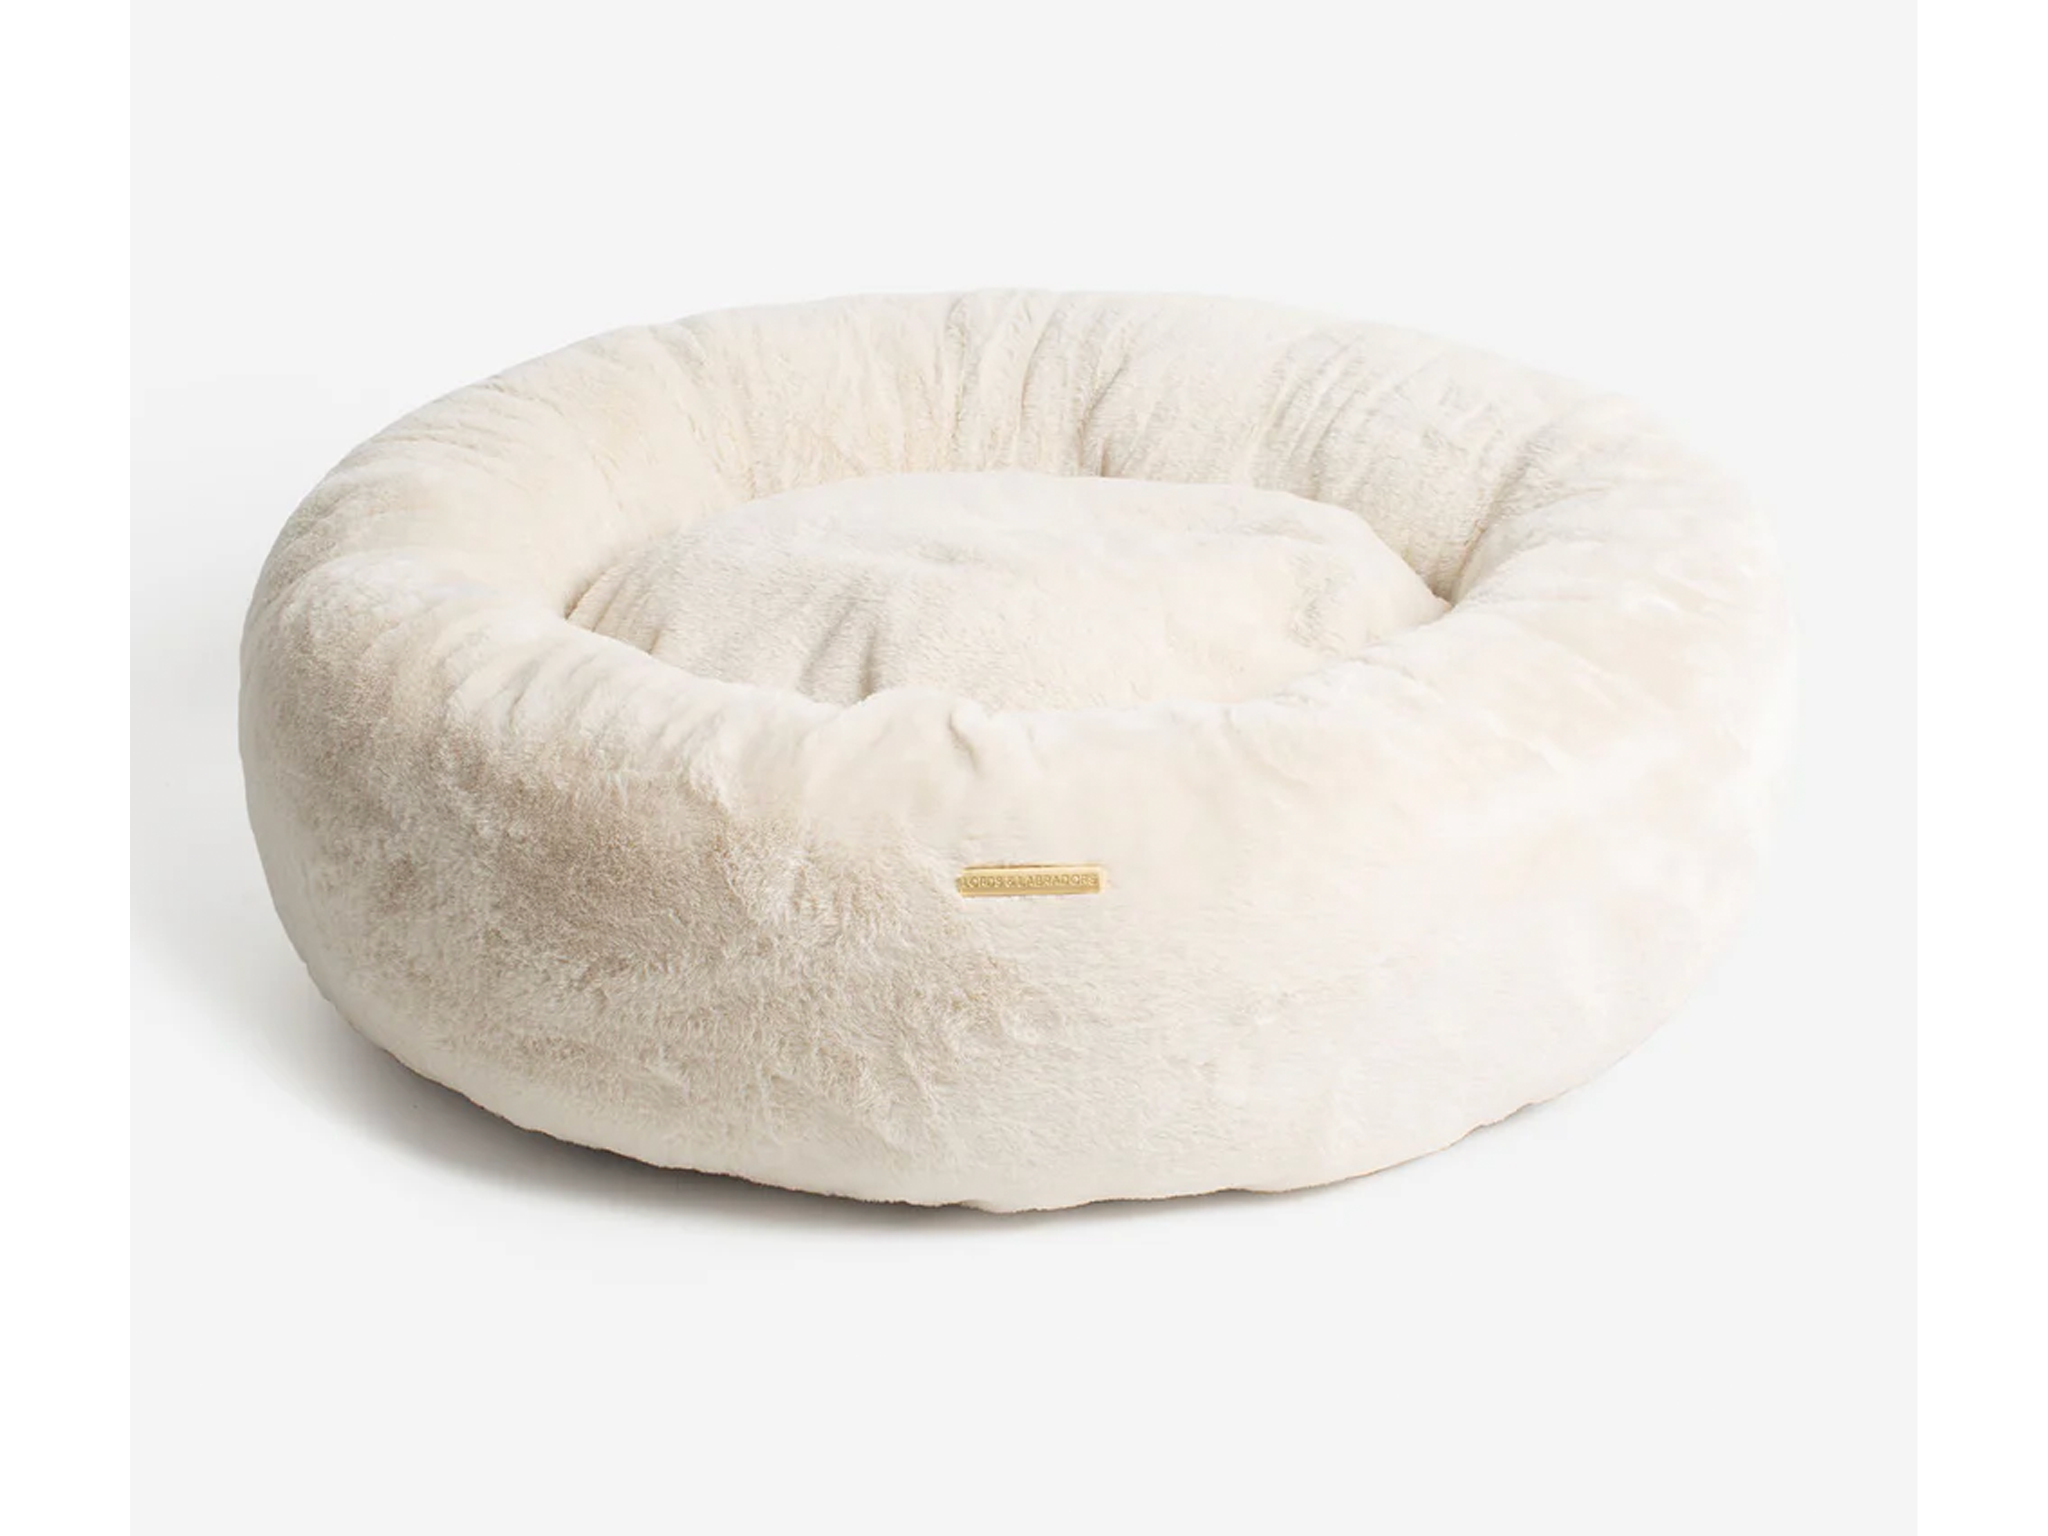 Lords-and-labradors-best-dog-beds-indybest